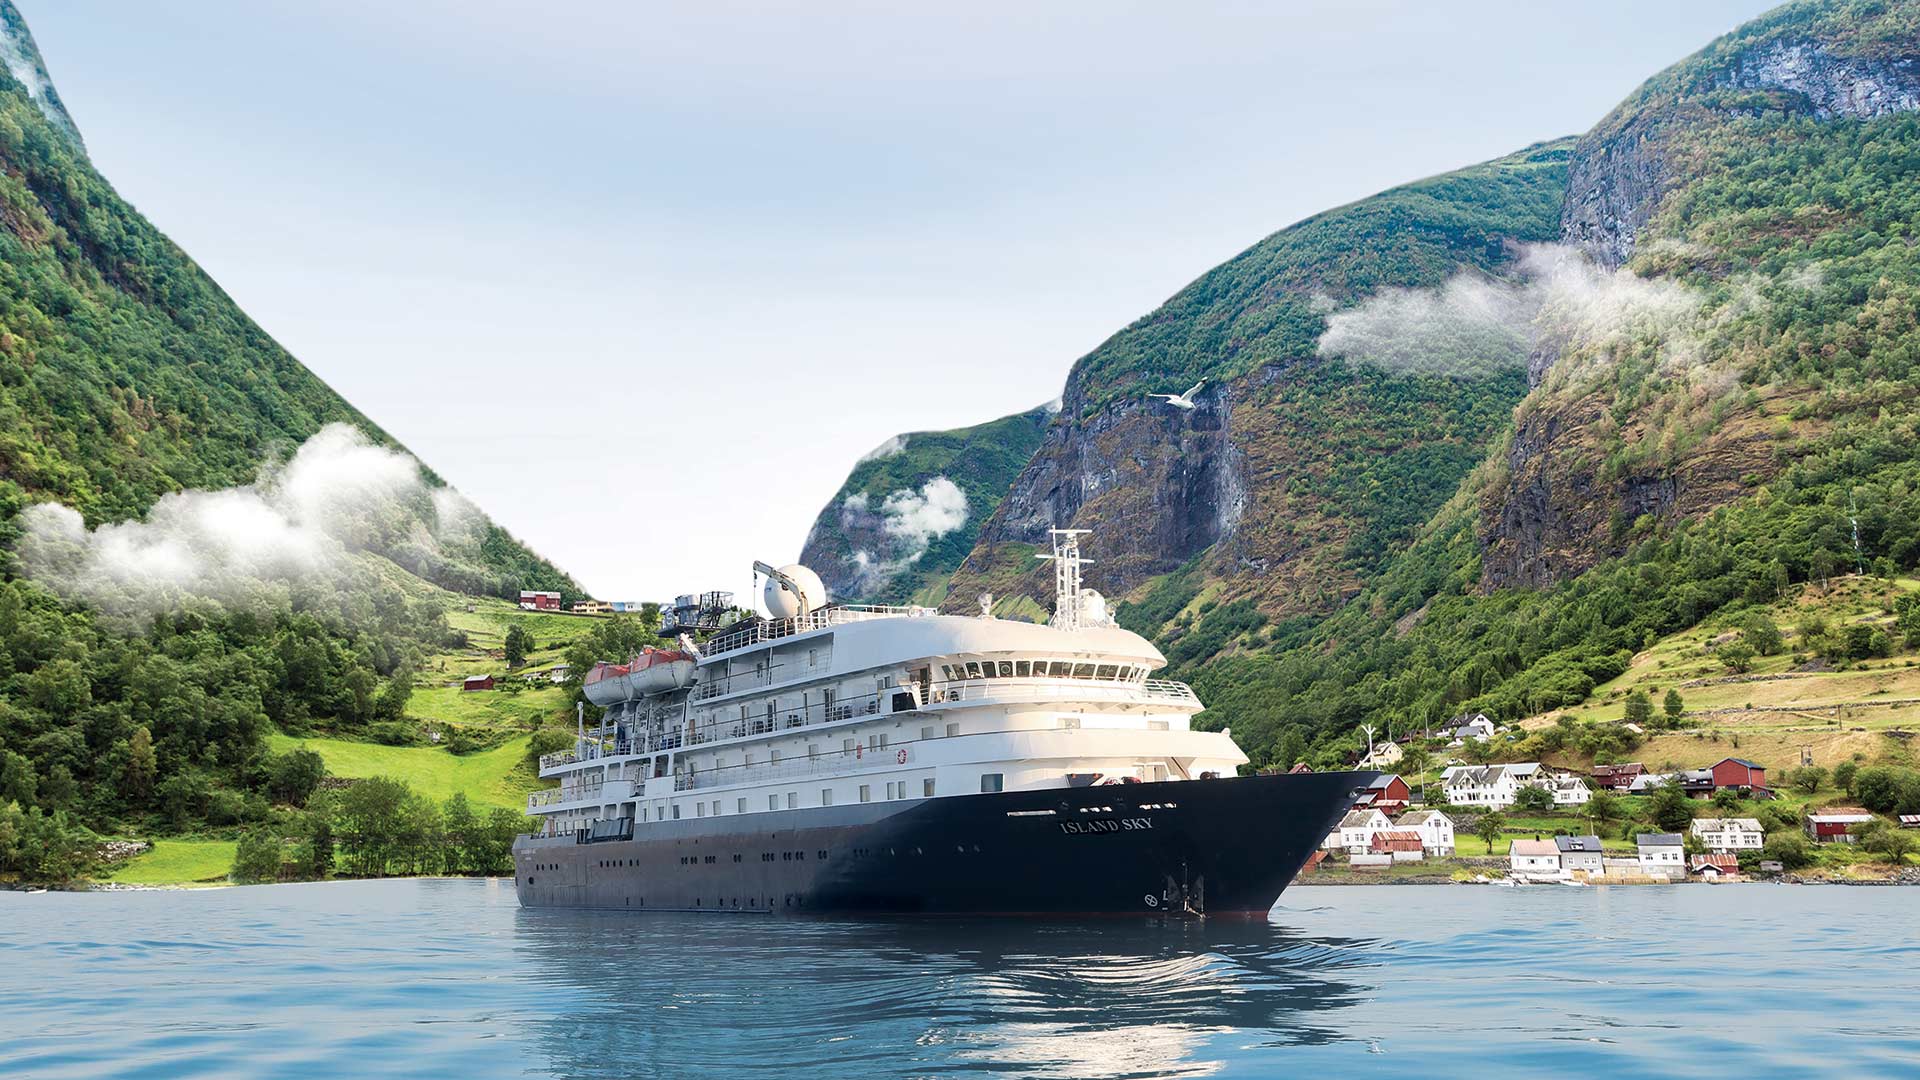 Explore the fjords or Norway on a small ship cruise